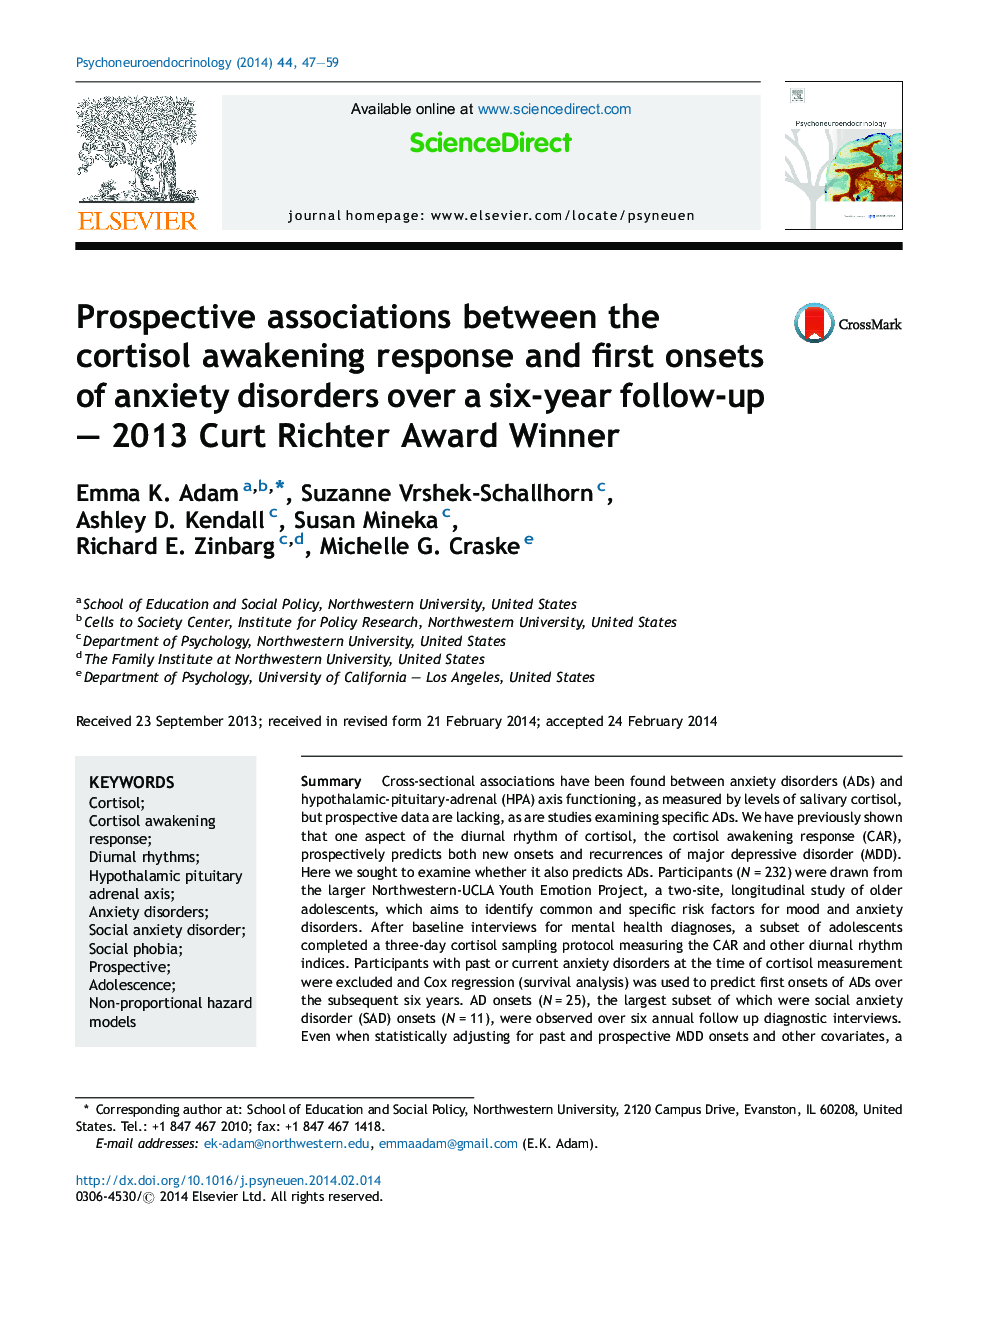 Prospective associations between the cortisol awakening response and first onsets of anxiety disorders over a six-year follow-up – 2013 Curt Richter Award Winner